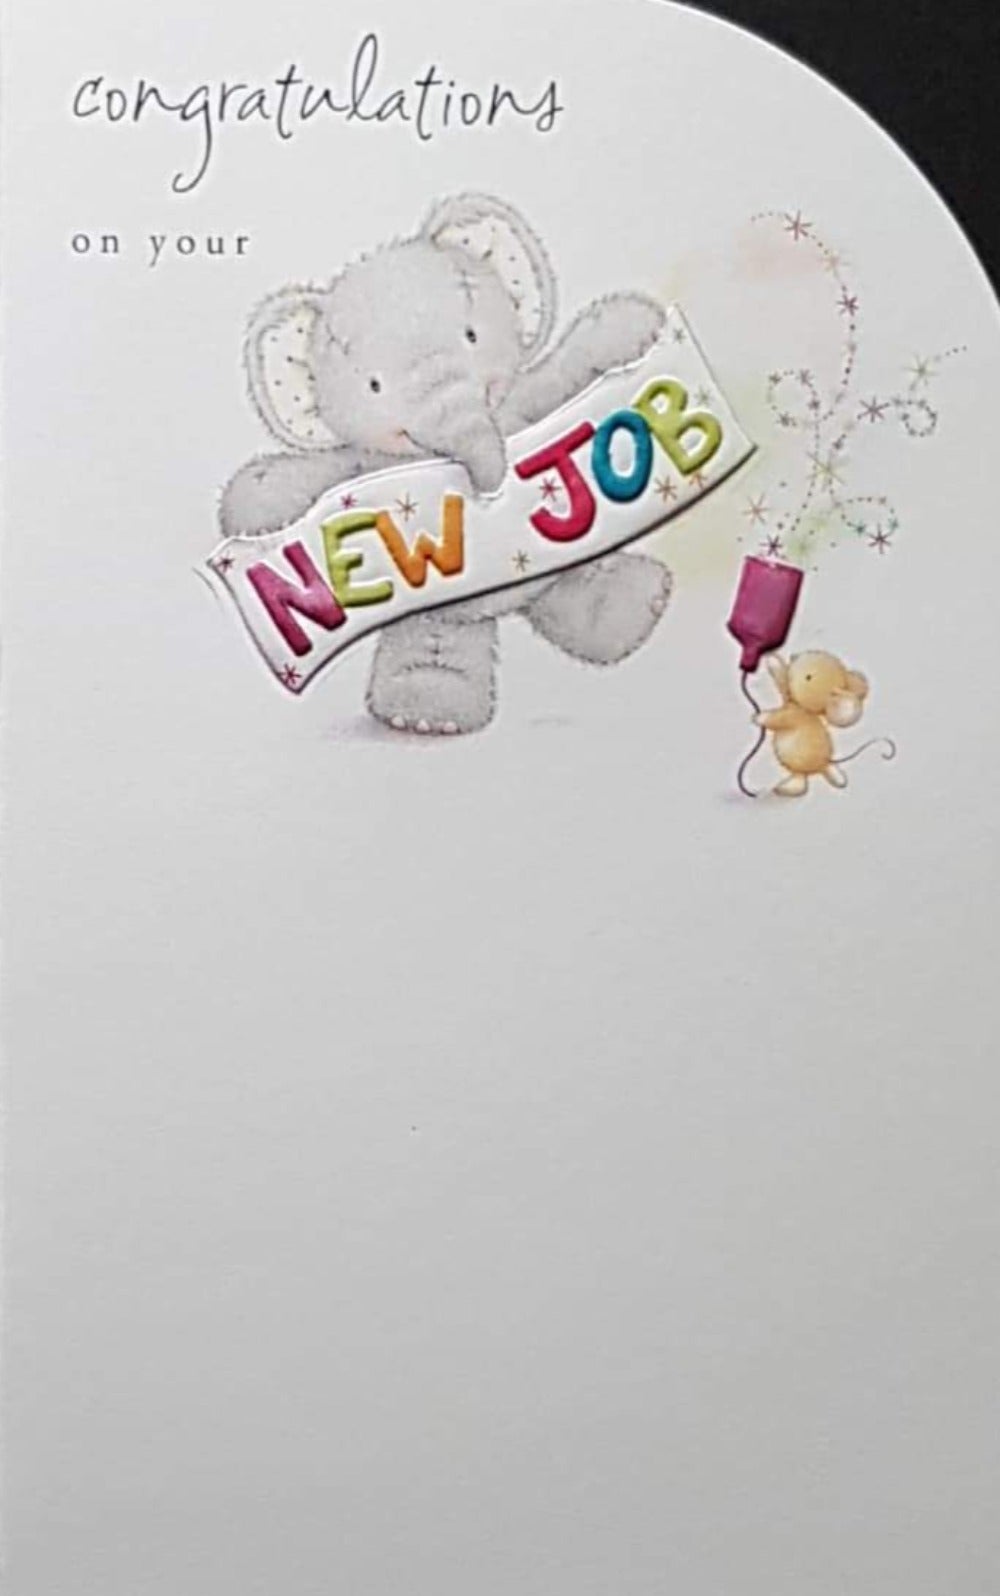 Congratulations Card - New Job & Elephant And Mouse & Crackers